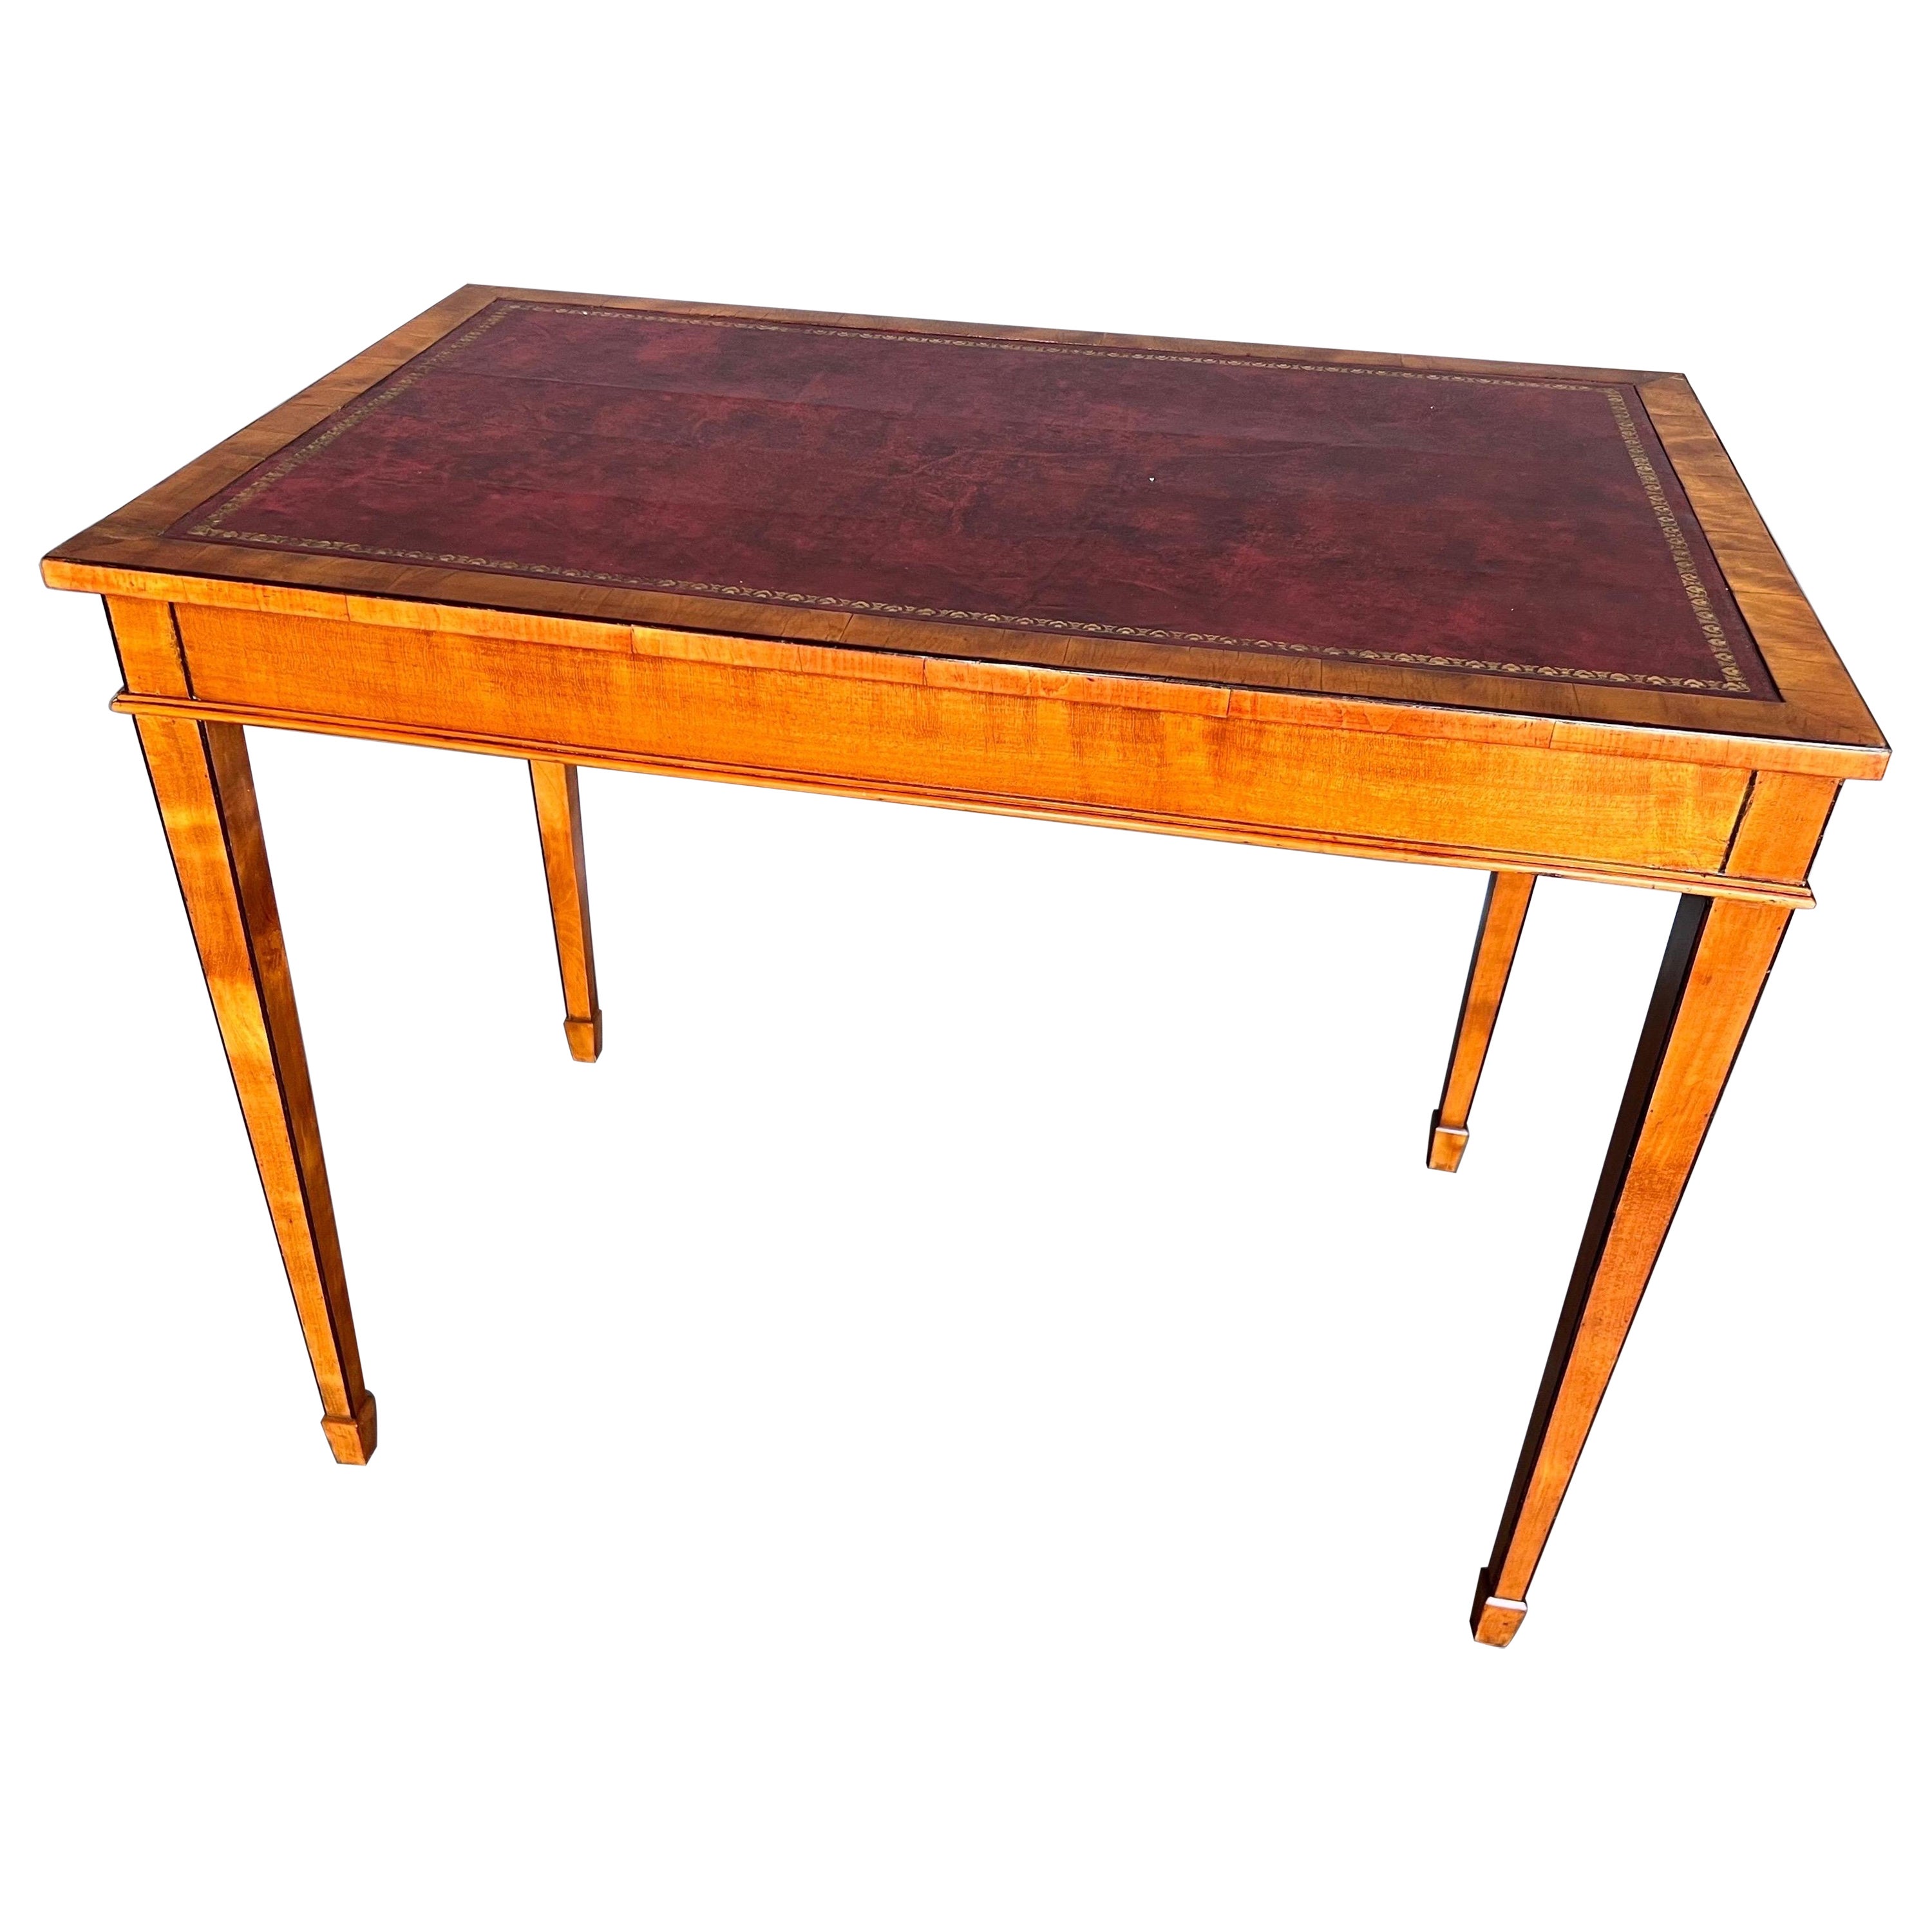 19th Century English Satinwood and Leather Table For Sale